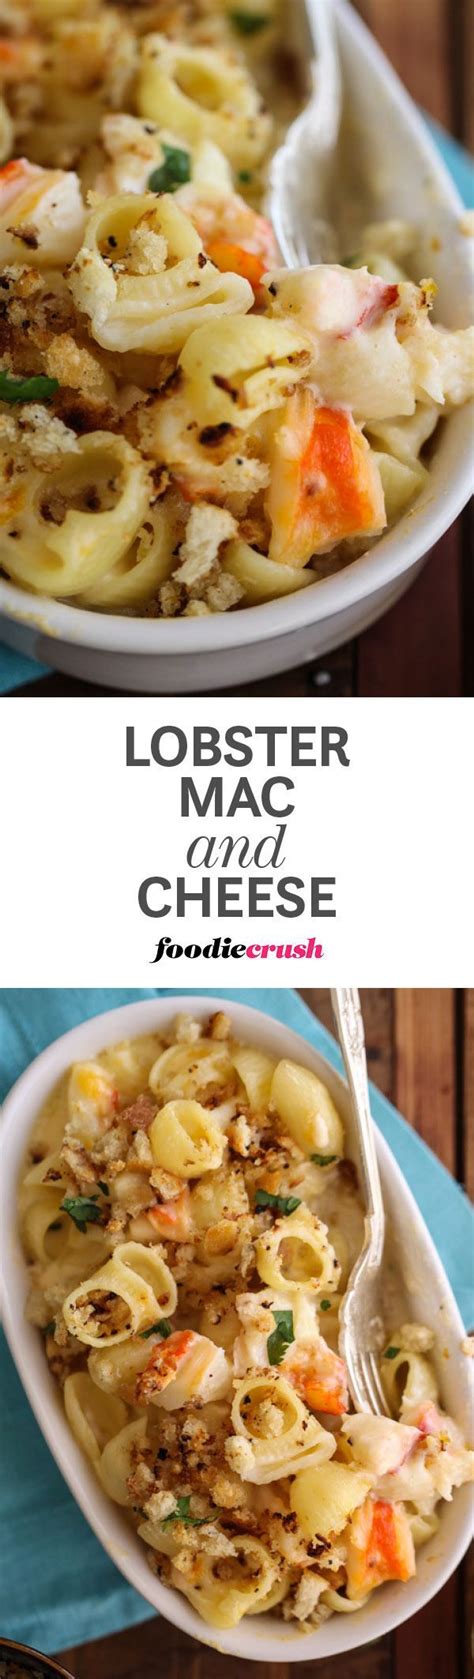 Silky Creamy Cheese Is The Secret To This Decadent Lobster Macaroni